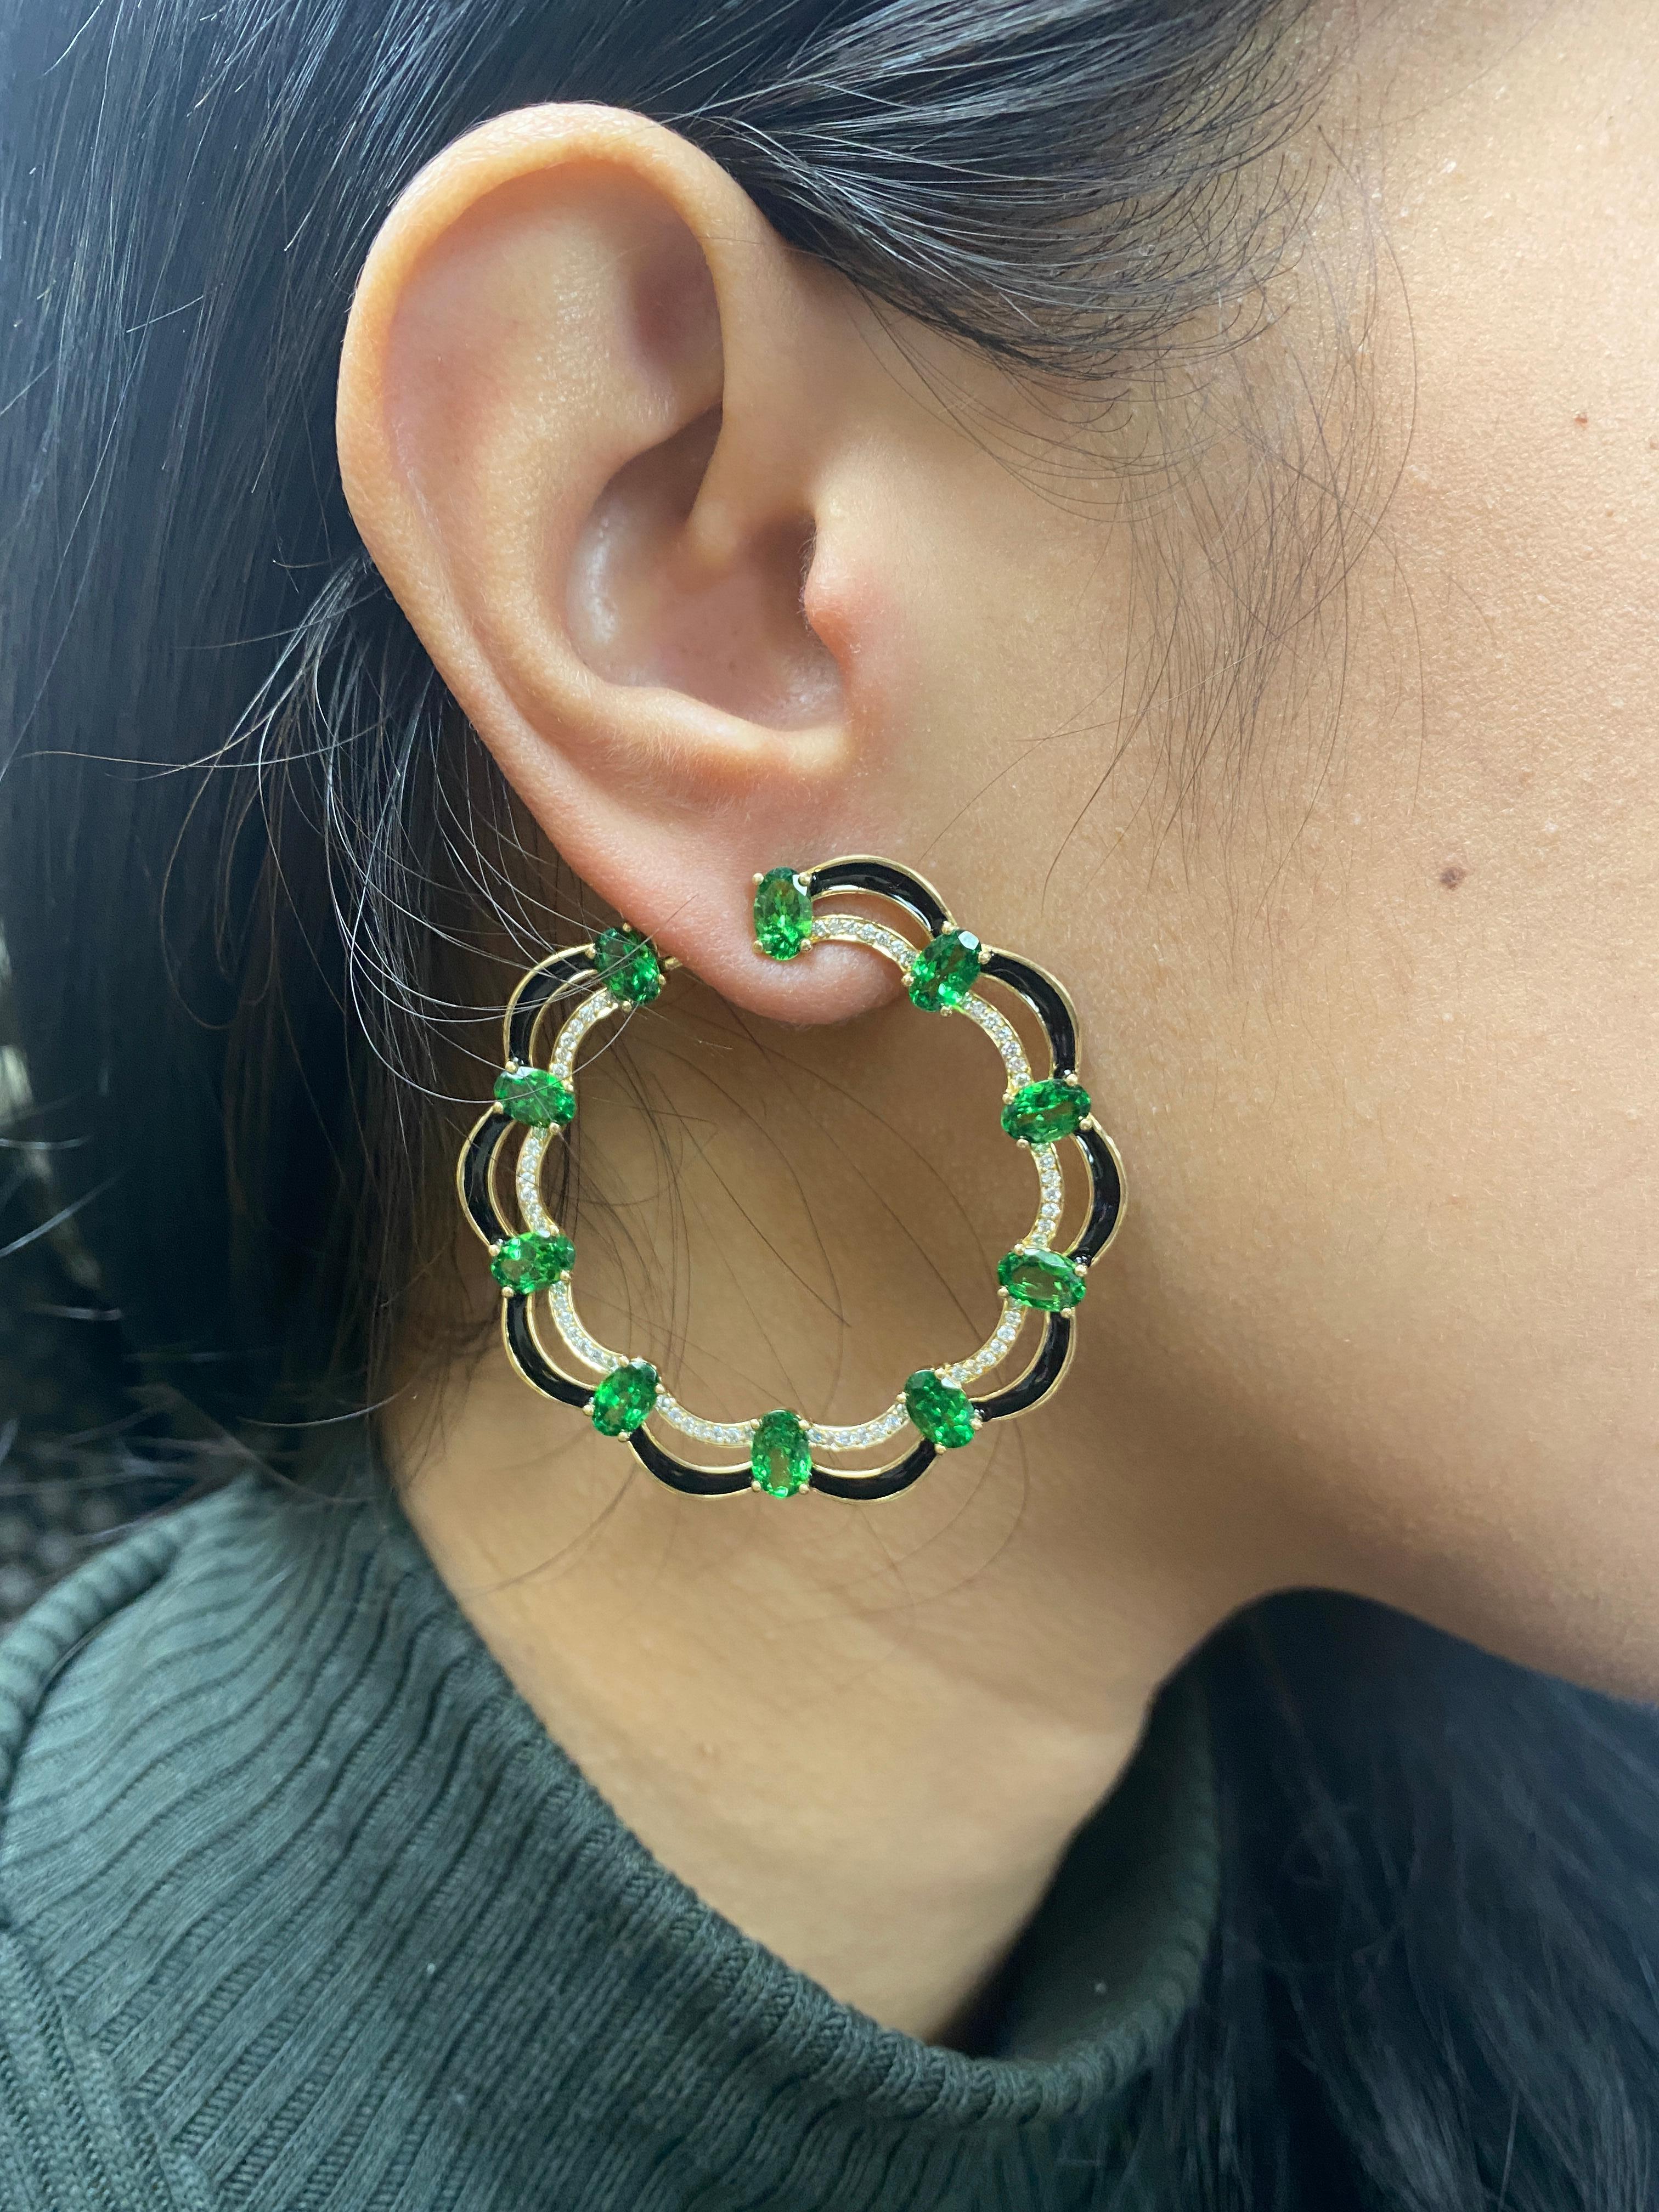 Green Tsavorite Earrings with Diamonds in 18K Yellow Gold, from 'Limited Edition'. These limited edition items are just that! Limited! 

Feel the exclusiveness in every piece from this collection and Feel the love in these limited edition creations.